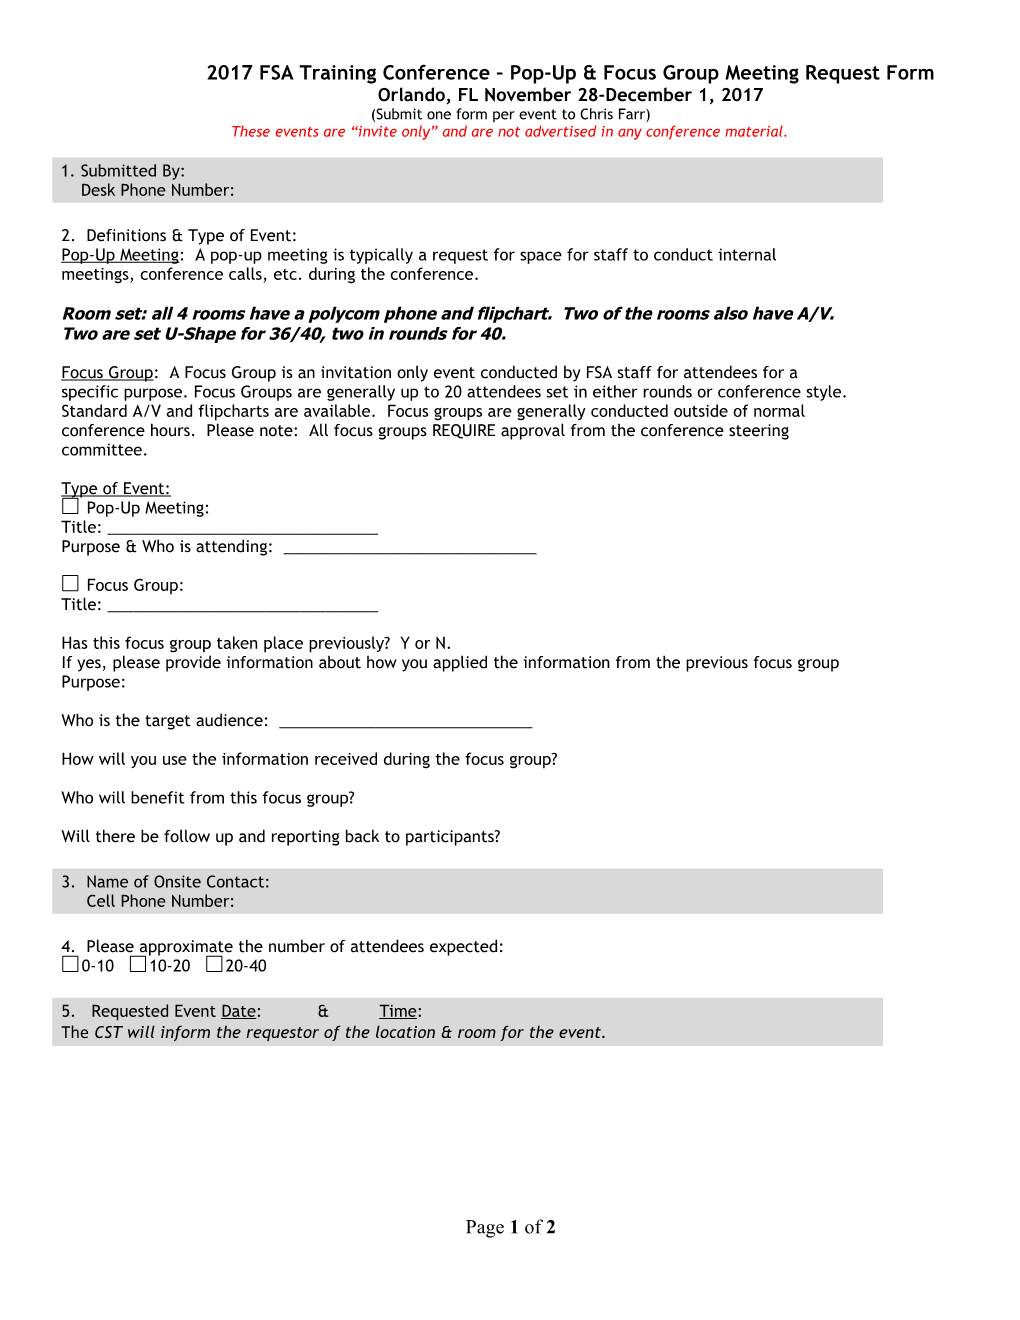 Please Complete This Form and Send to Debra Herbst No Later Than July 10, 2006